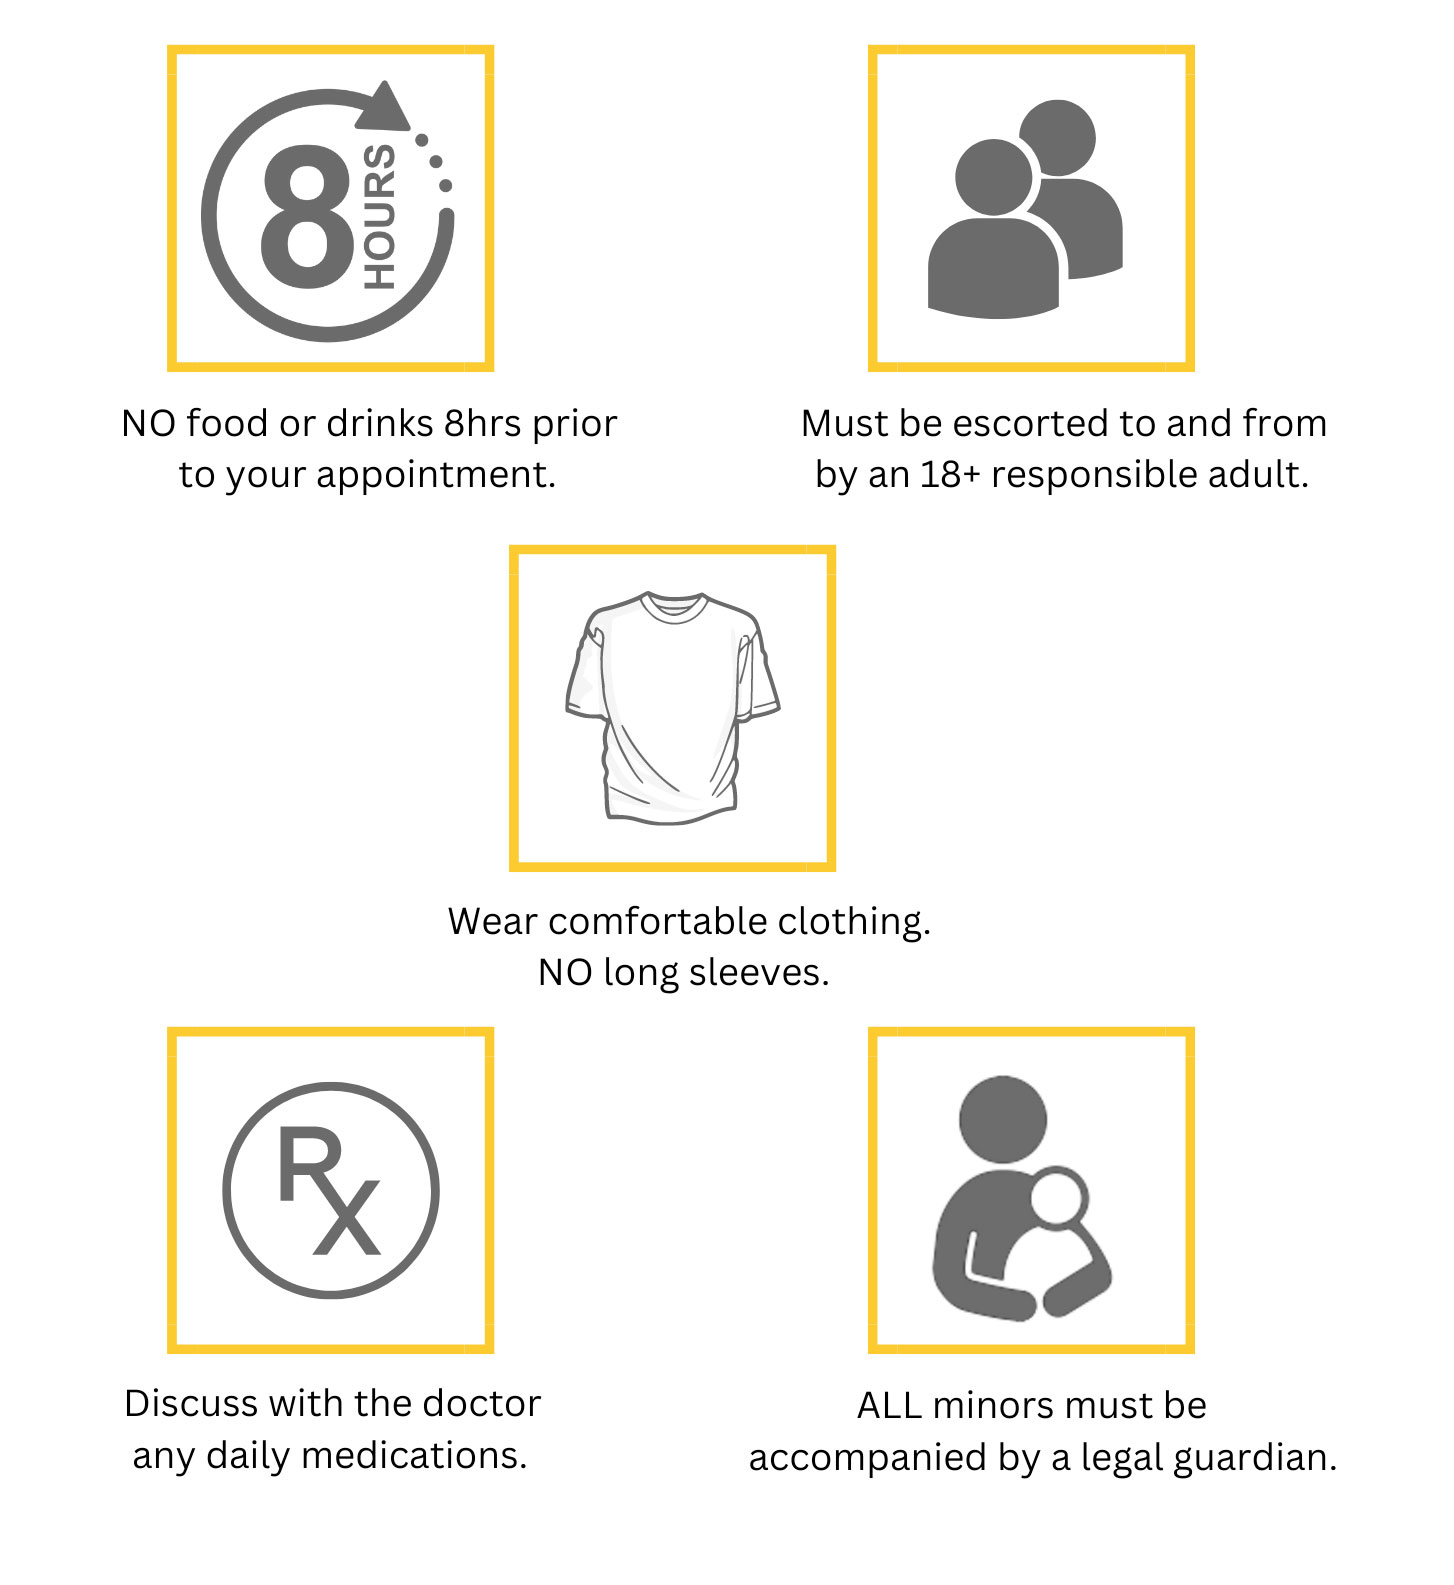 Mansfield Oral Surgery pre-sedation instructions infographic explaining the few steps patients should take before their appointment that may require IV Sedation